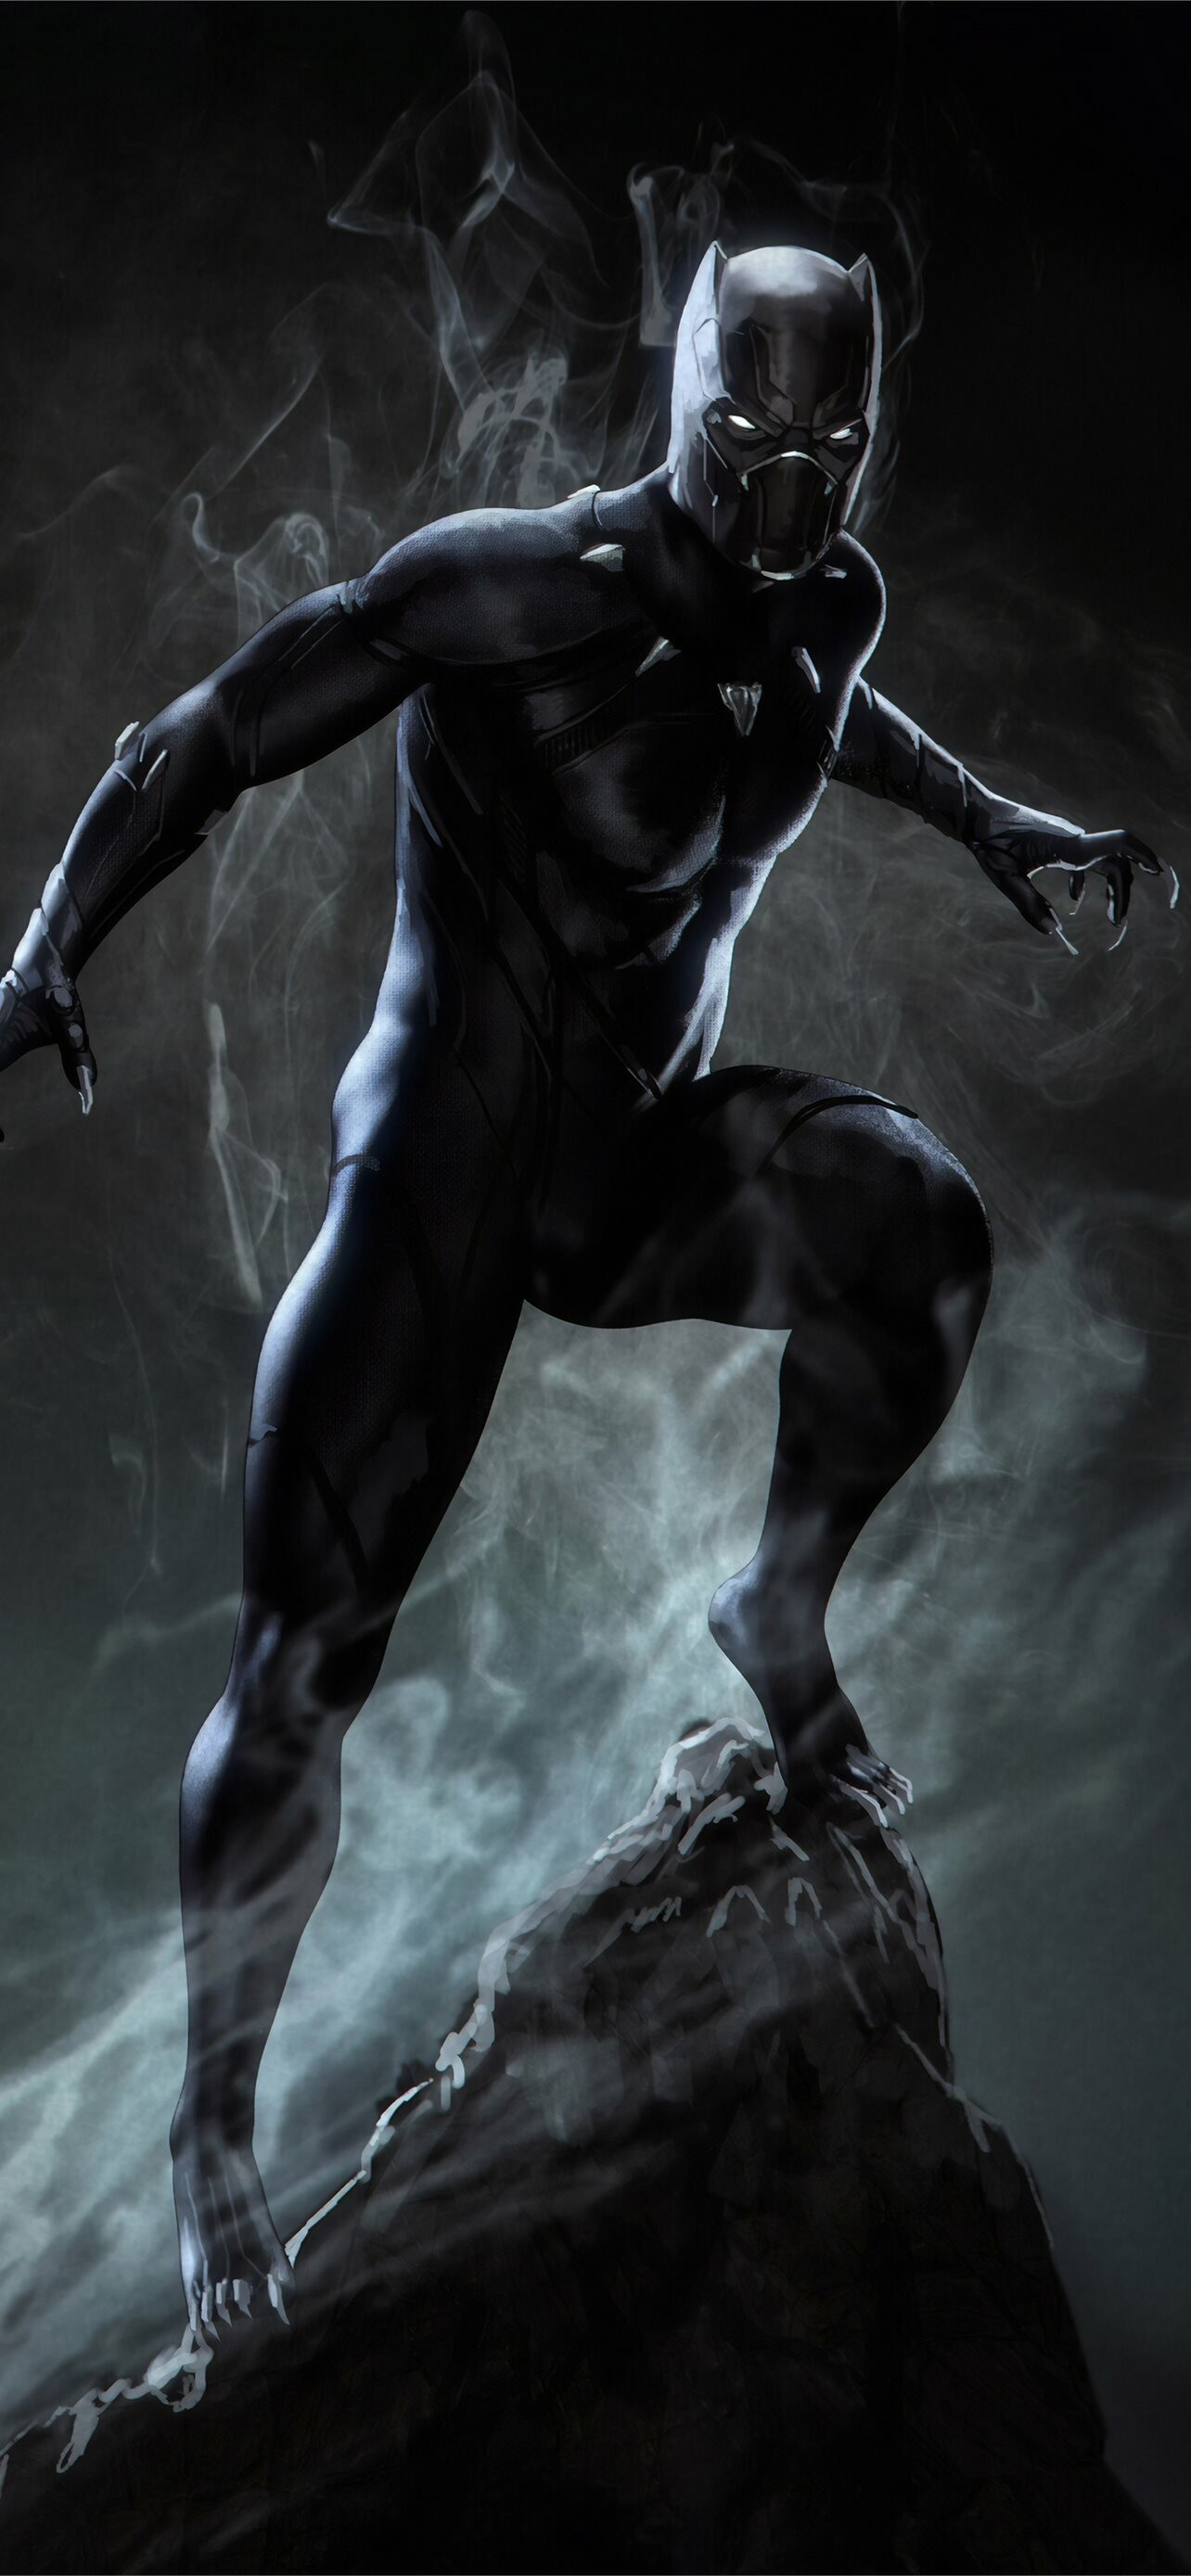 Marvel Heroes: Black Panther, Comic strip superhero created for Marvel Comics by writer Stan Lee and artist Jack Kirby. 1290x2780 HD Background.